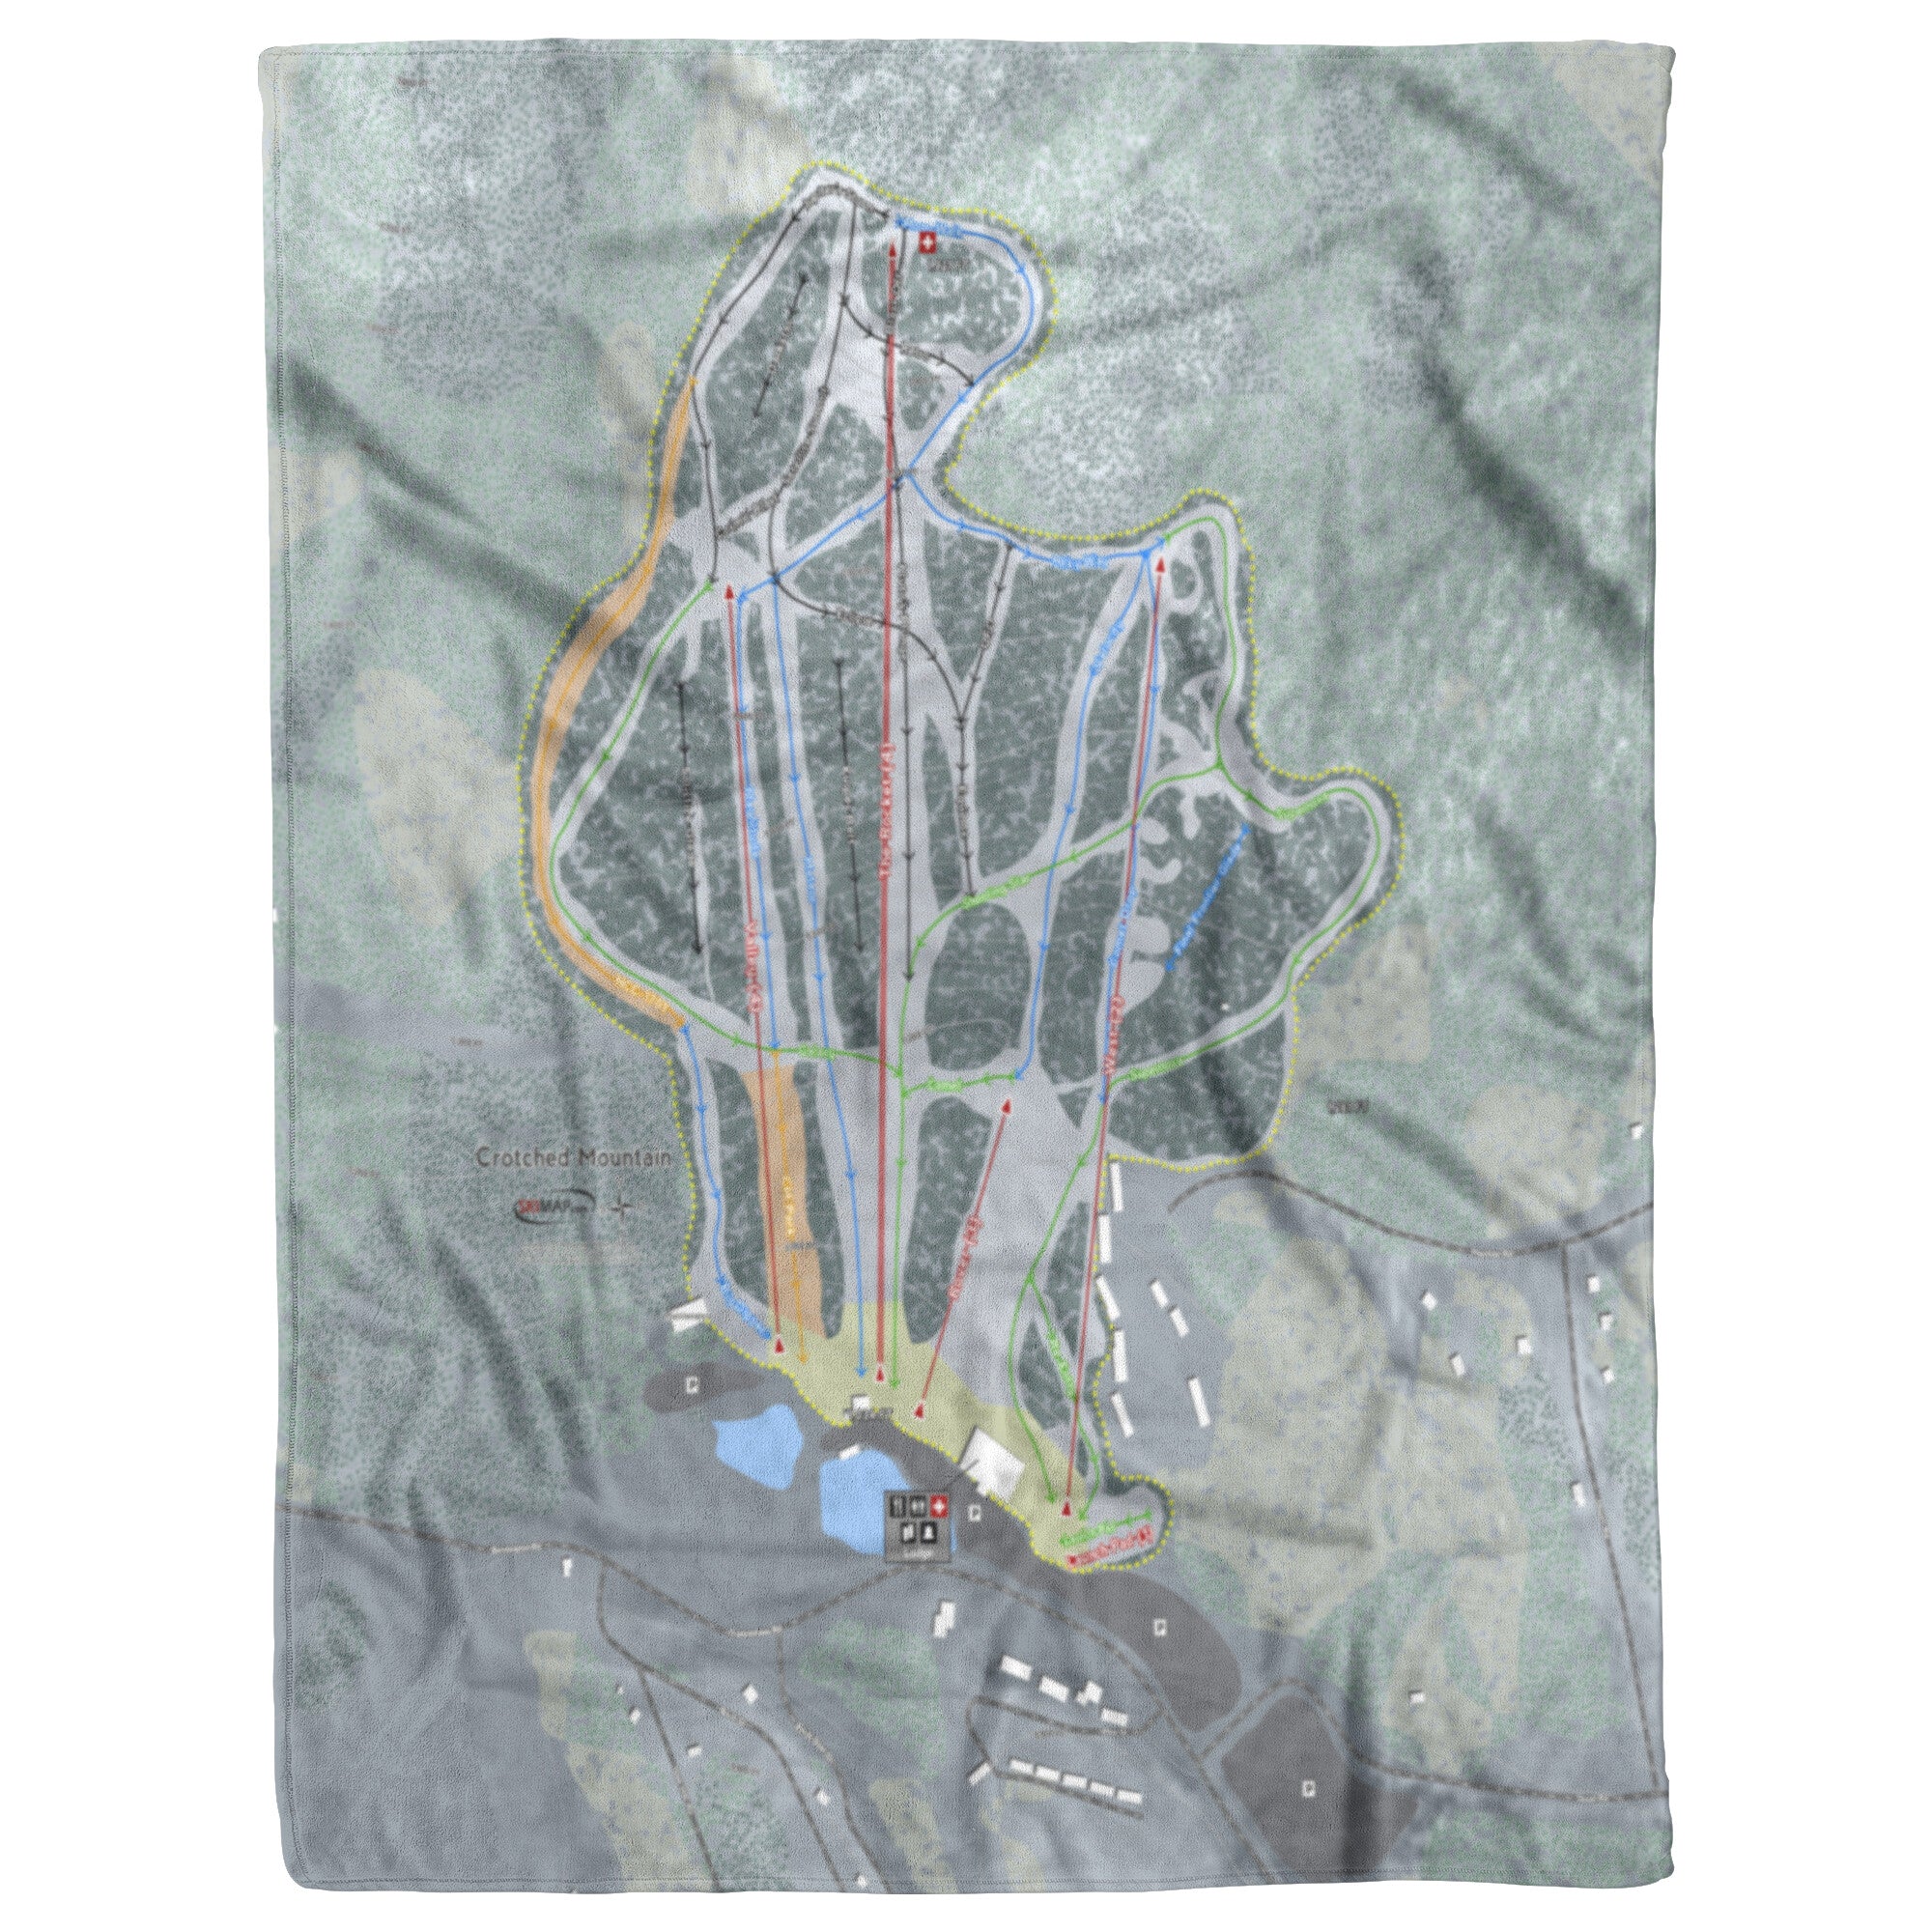 Crotched Mountain, New Hampshire Ski Trail Map Blanket